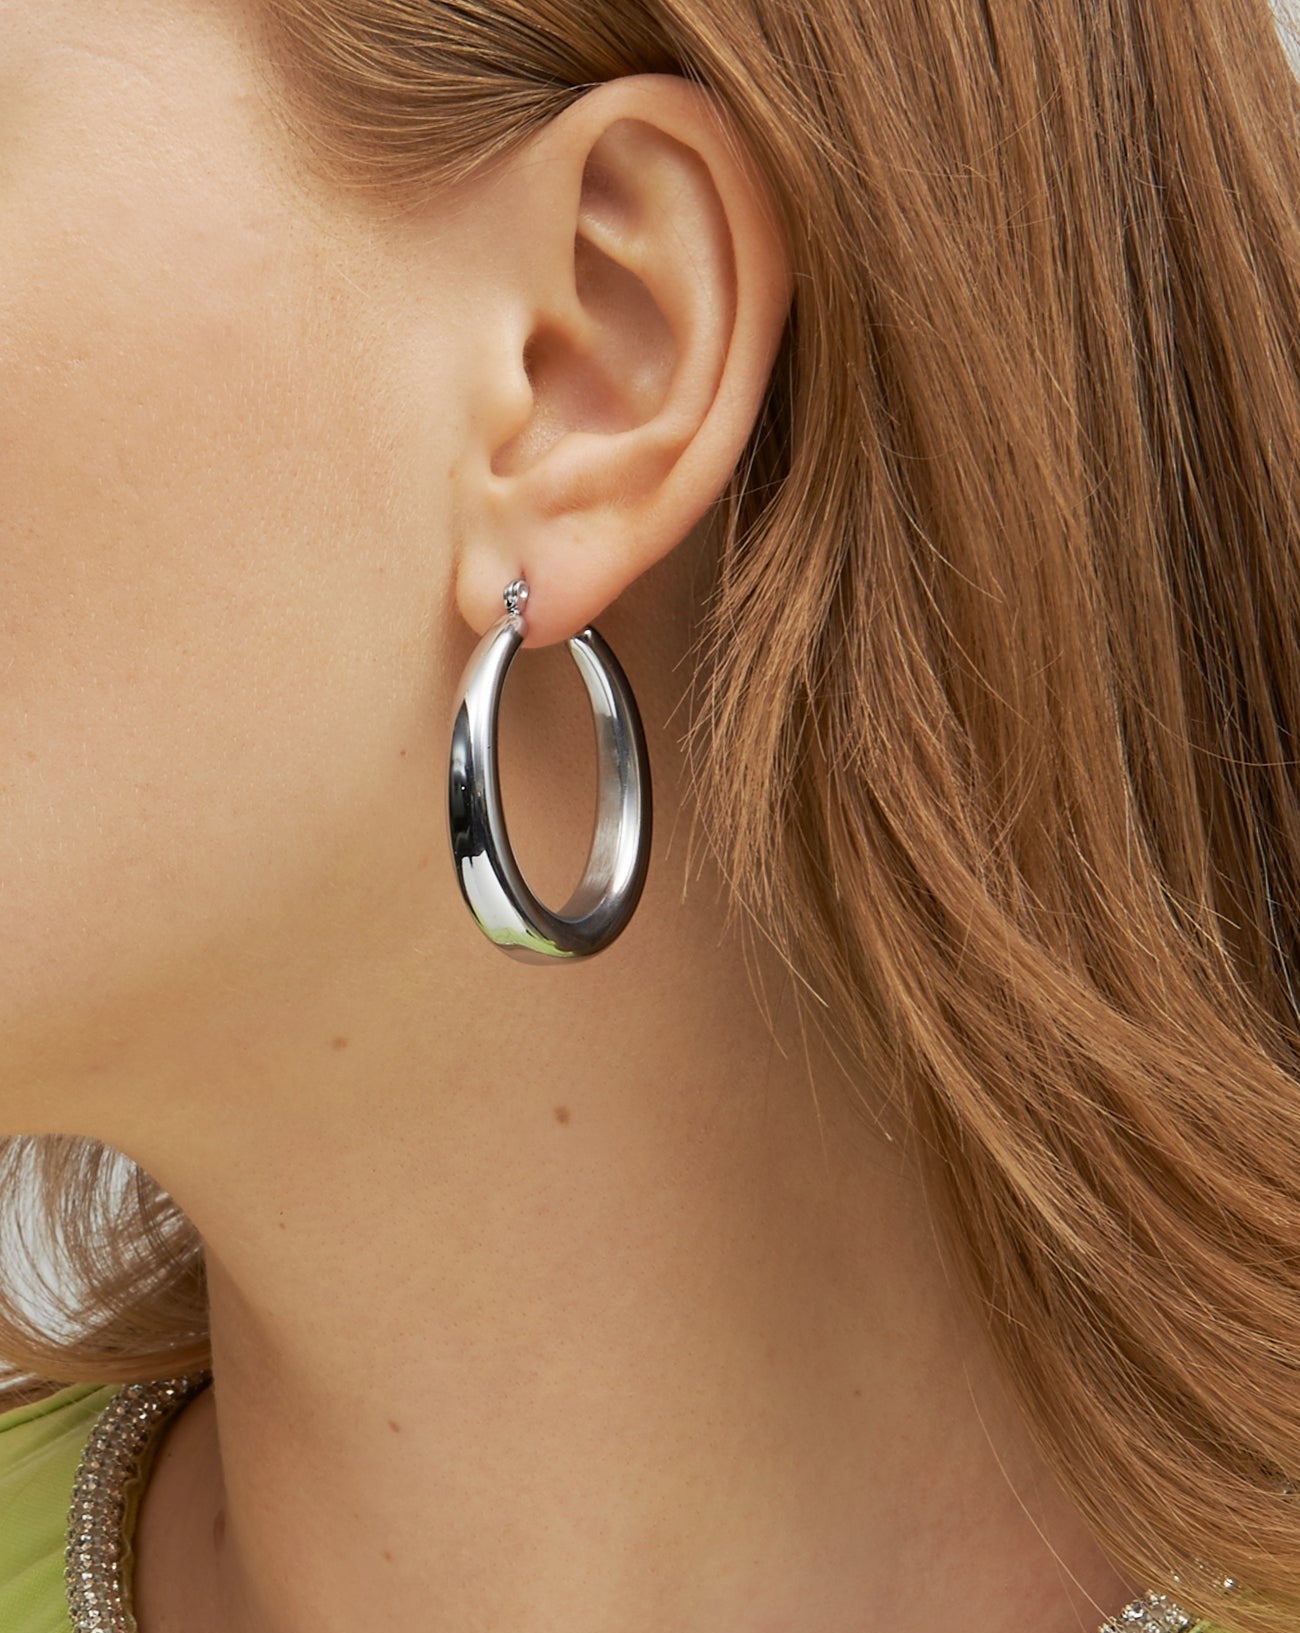 Close-up of a person wearing a large, smooth, For Art's Sake® Oval Earrings Silver with a small diamond accent. The person's ear and part of their reddish-brown hair are visible, and they are wearing a light green top with a beaded collar.